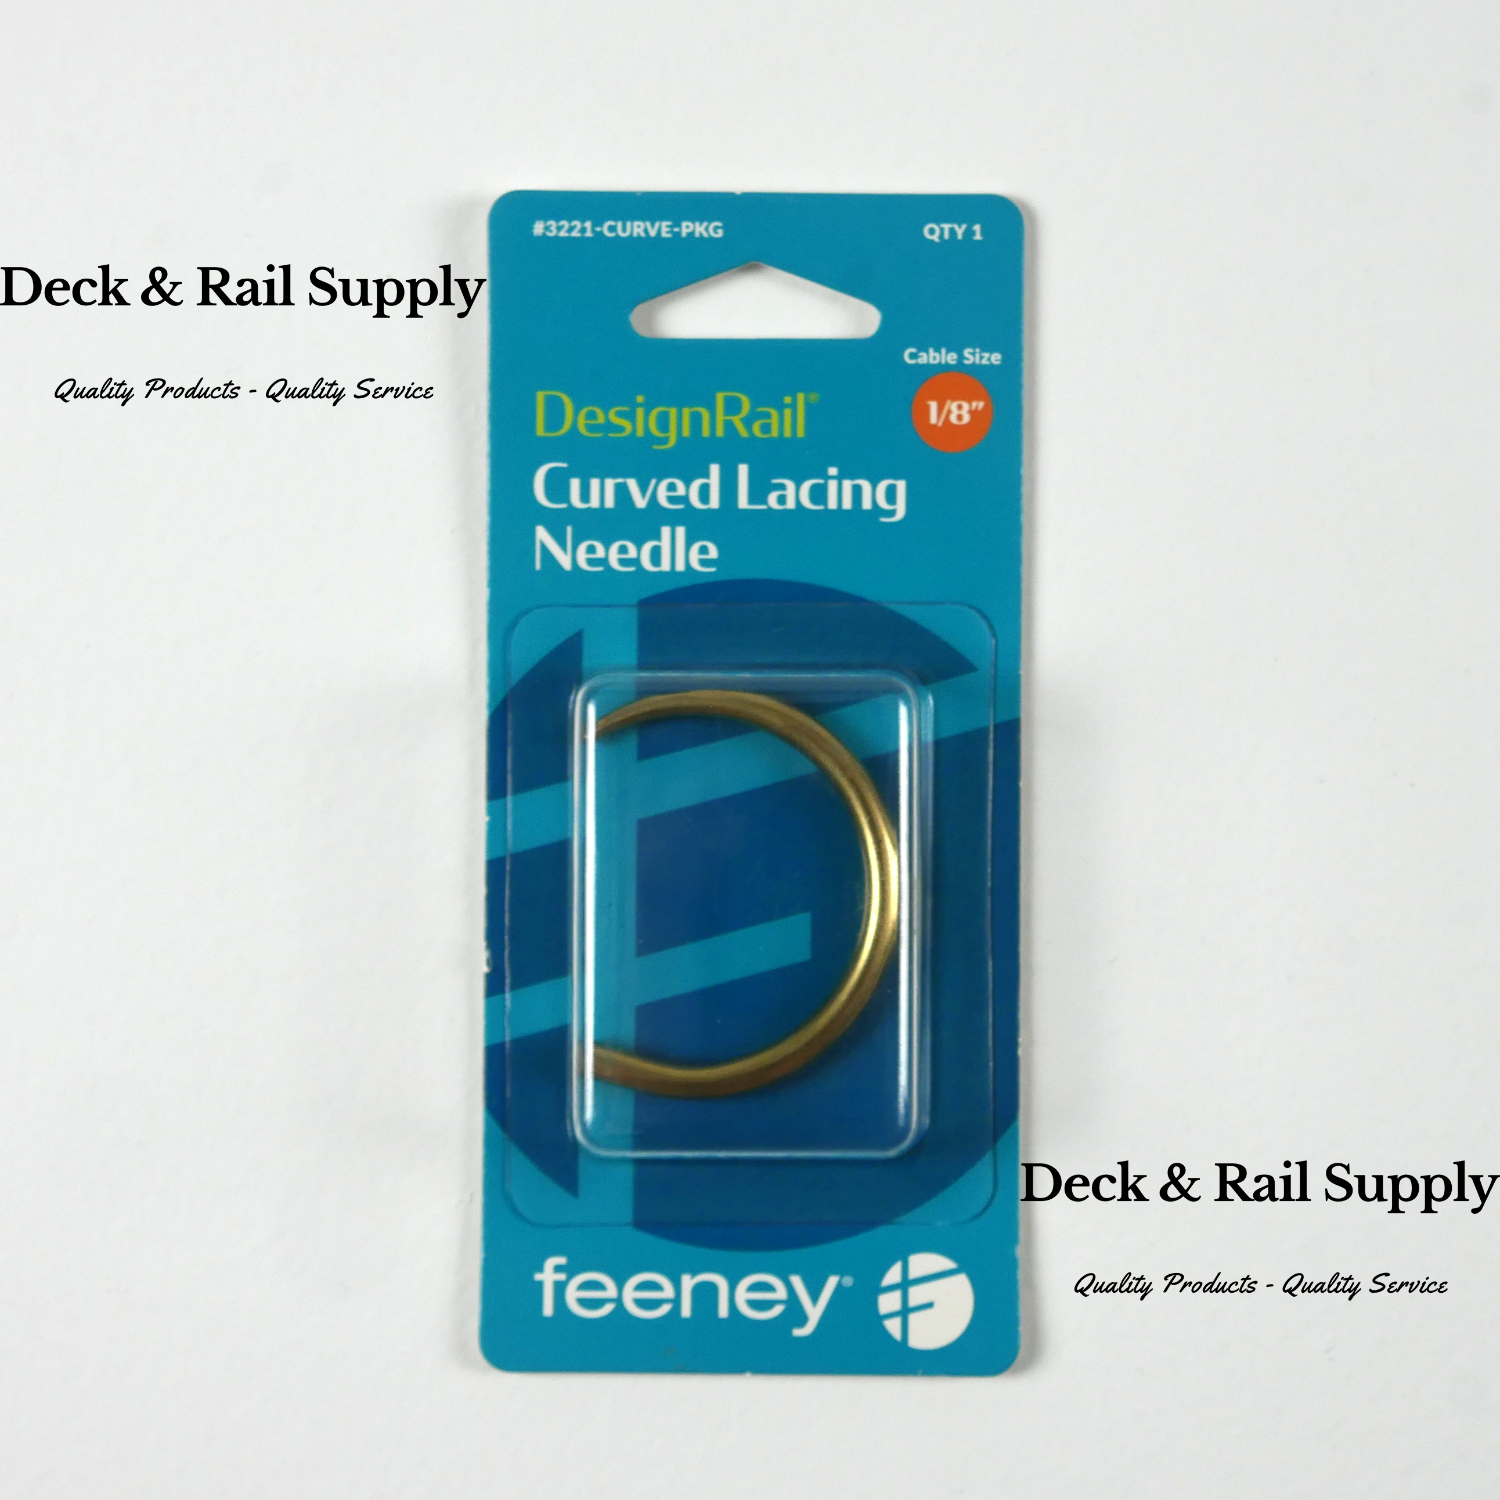 Feeney Curved Lacing Needle for 1/8'" cable is designed to be used with single corner posts to easily thread the cable 